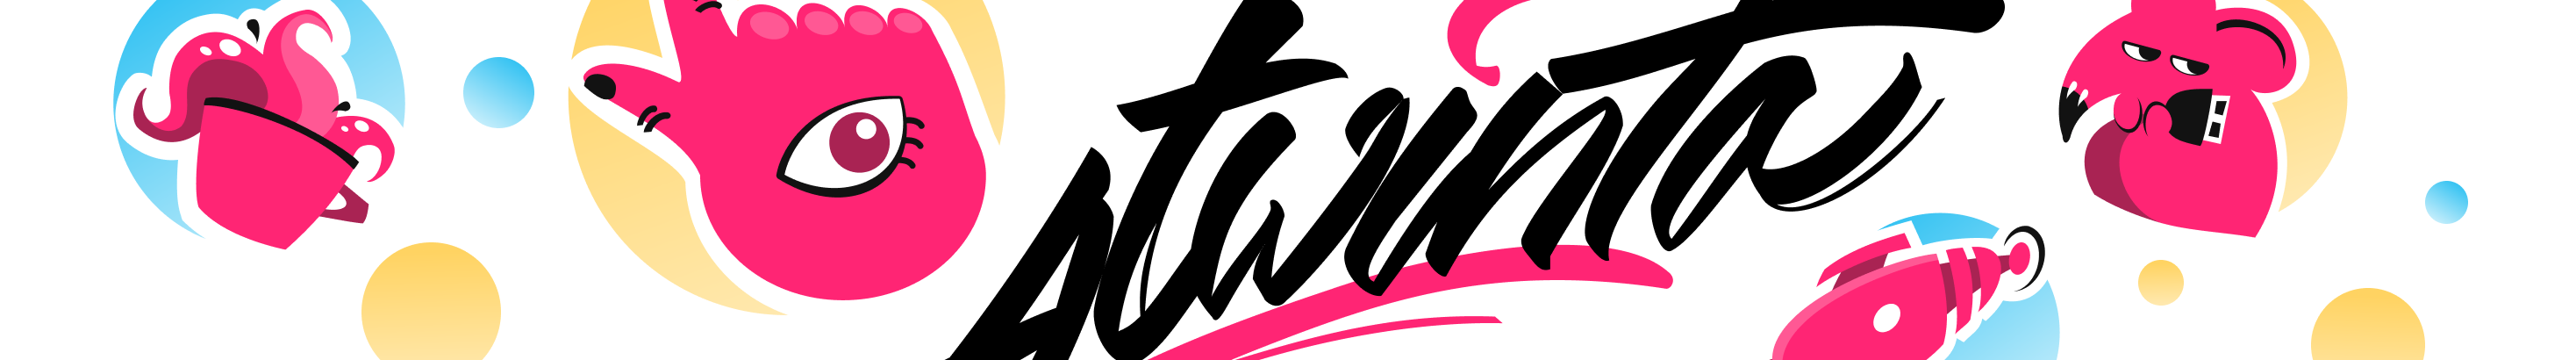 Atwinta Agency's profile banner